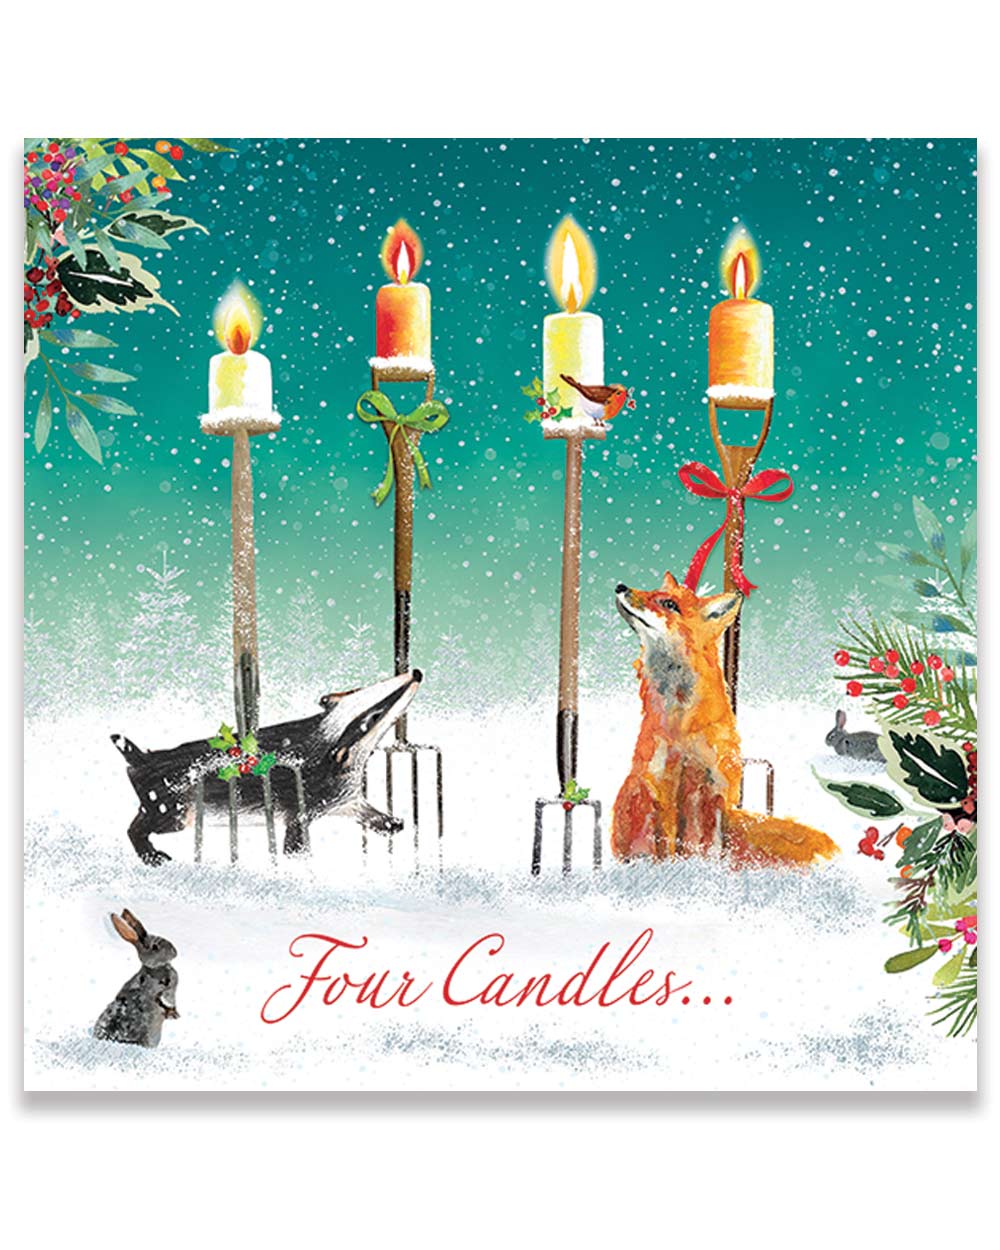 Made in the UK from FSC certified paper and card making them 100% recyclable, even the packaging they come in is recyclable! Created using environmentally friendly vegetable inks and coatings on our cards are water based.  These Christmas cards feature a gorgeous wintery scene with cute woodland creatures and the four candles.